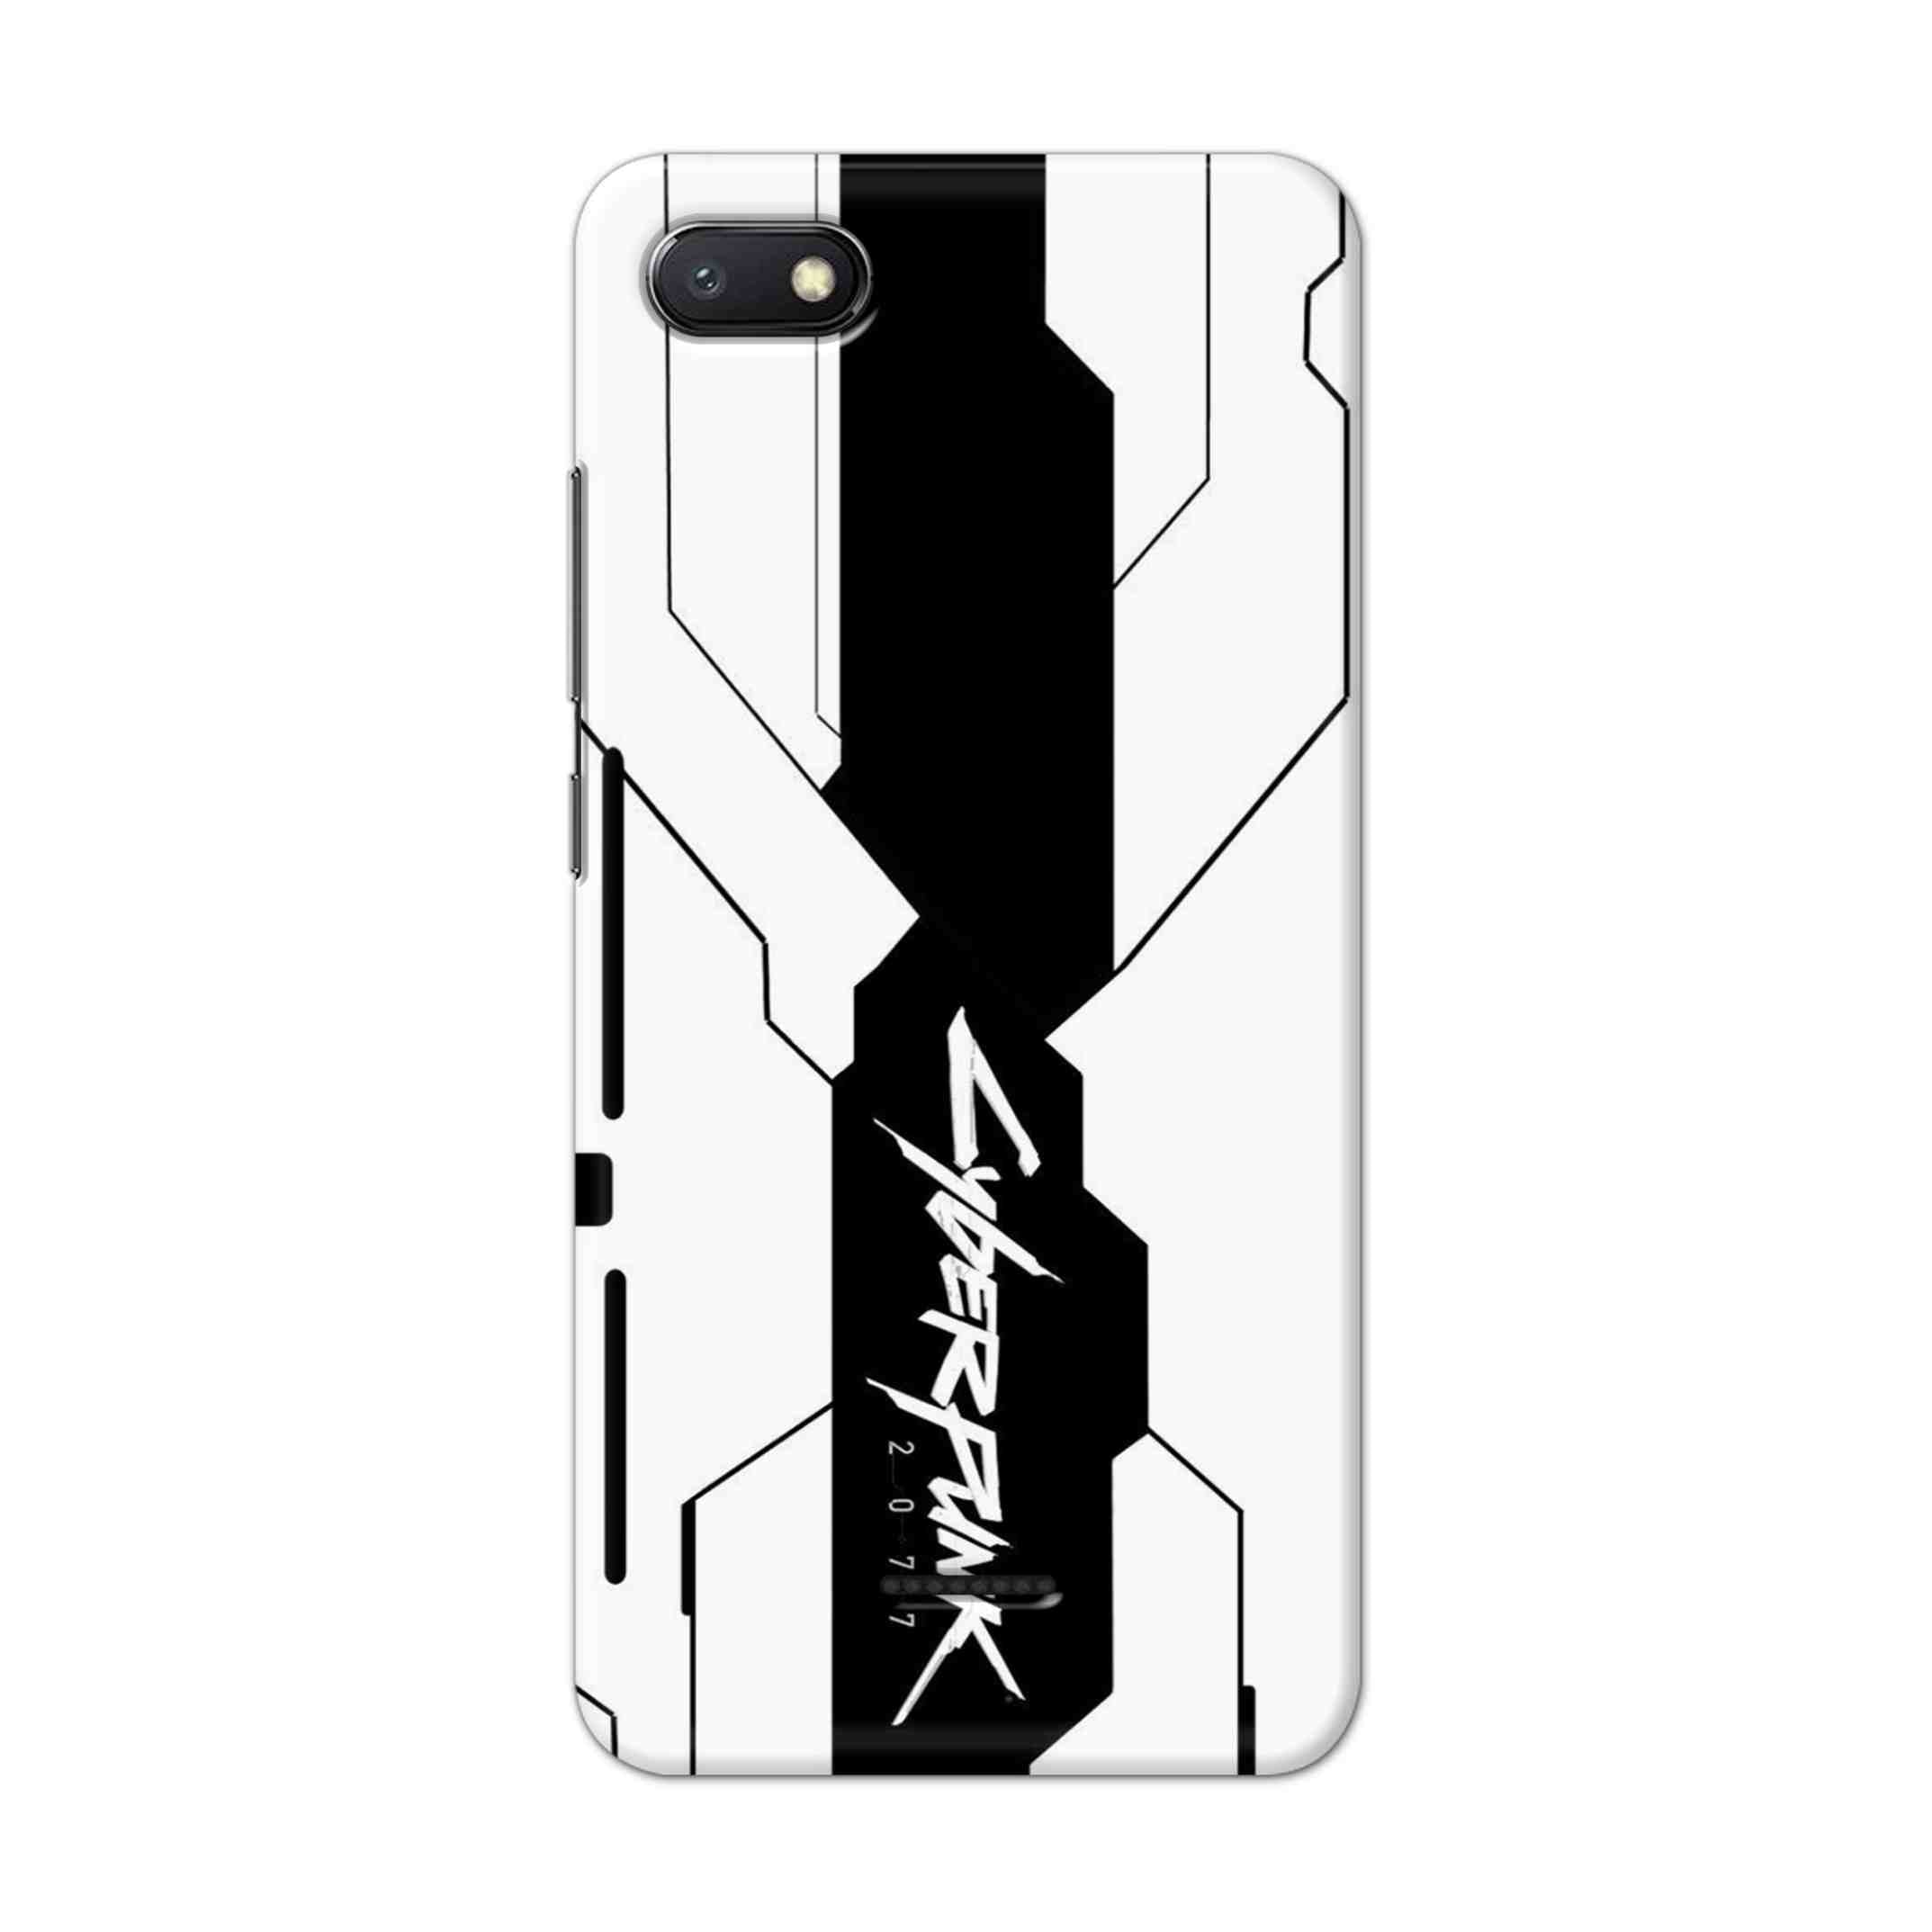 Buy Cyberpunk 2077 Hard Back Mobile Phone Case/Cover For Xiaomi Redmi 6A Online